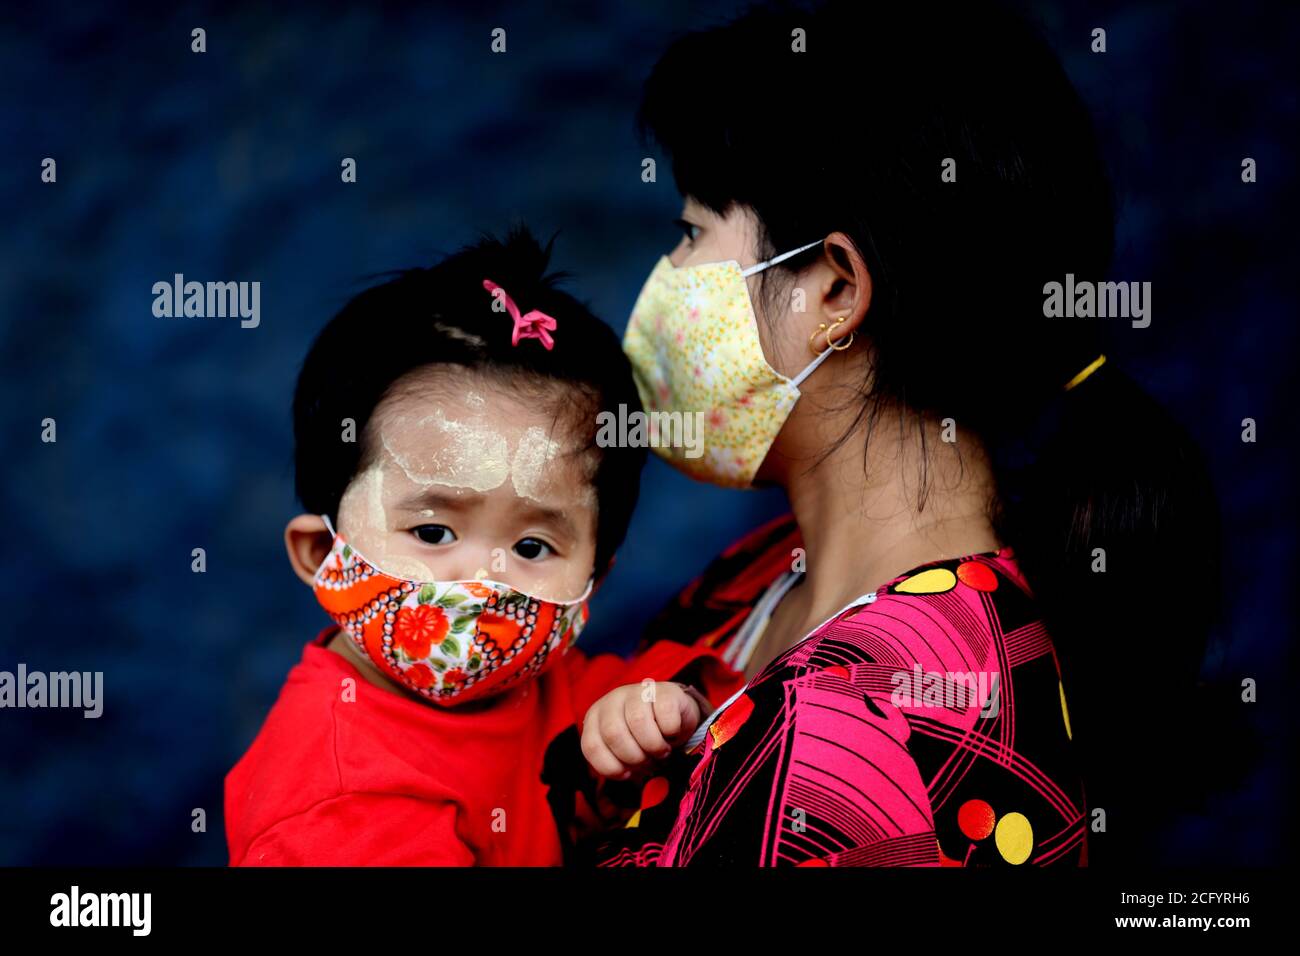 Yangon, Myanmar. 8th Sep, 2020. A mother and her child wearing face masks stand in line while waiting to get their health checked during a medical checkup and contact tracing campaign in Yangon, Myanmar, Sept. 8, 2020. Myanmar reported 92 more new COVID-19 cases on Tuesday morning, according to a release from the Ministry of Health and Sports. Credit: U Aung/Xinhua/Alamy Live News Stock Photo